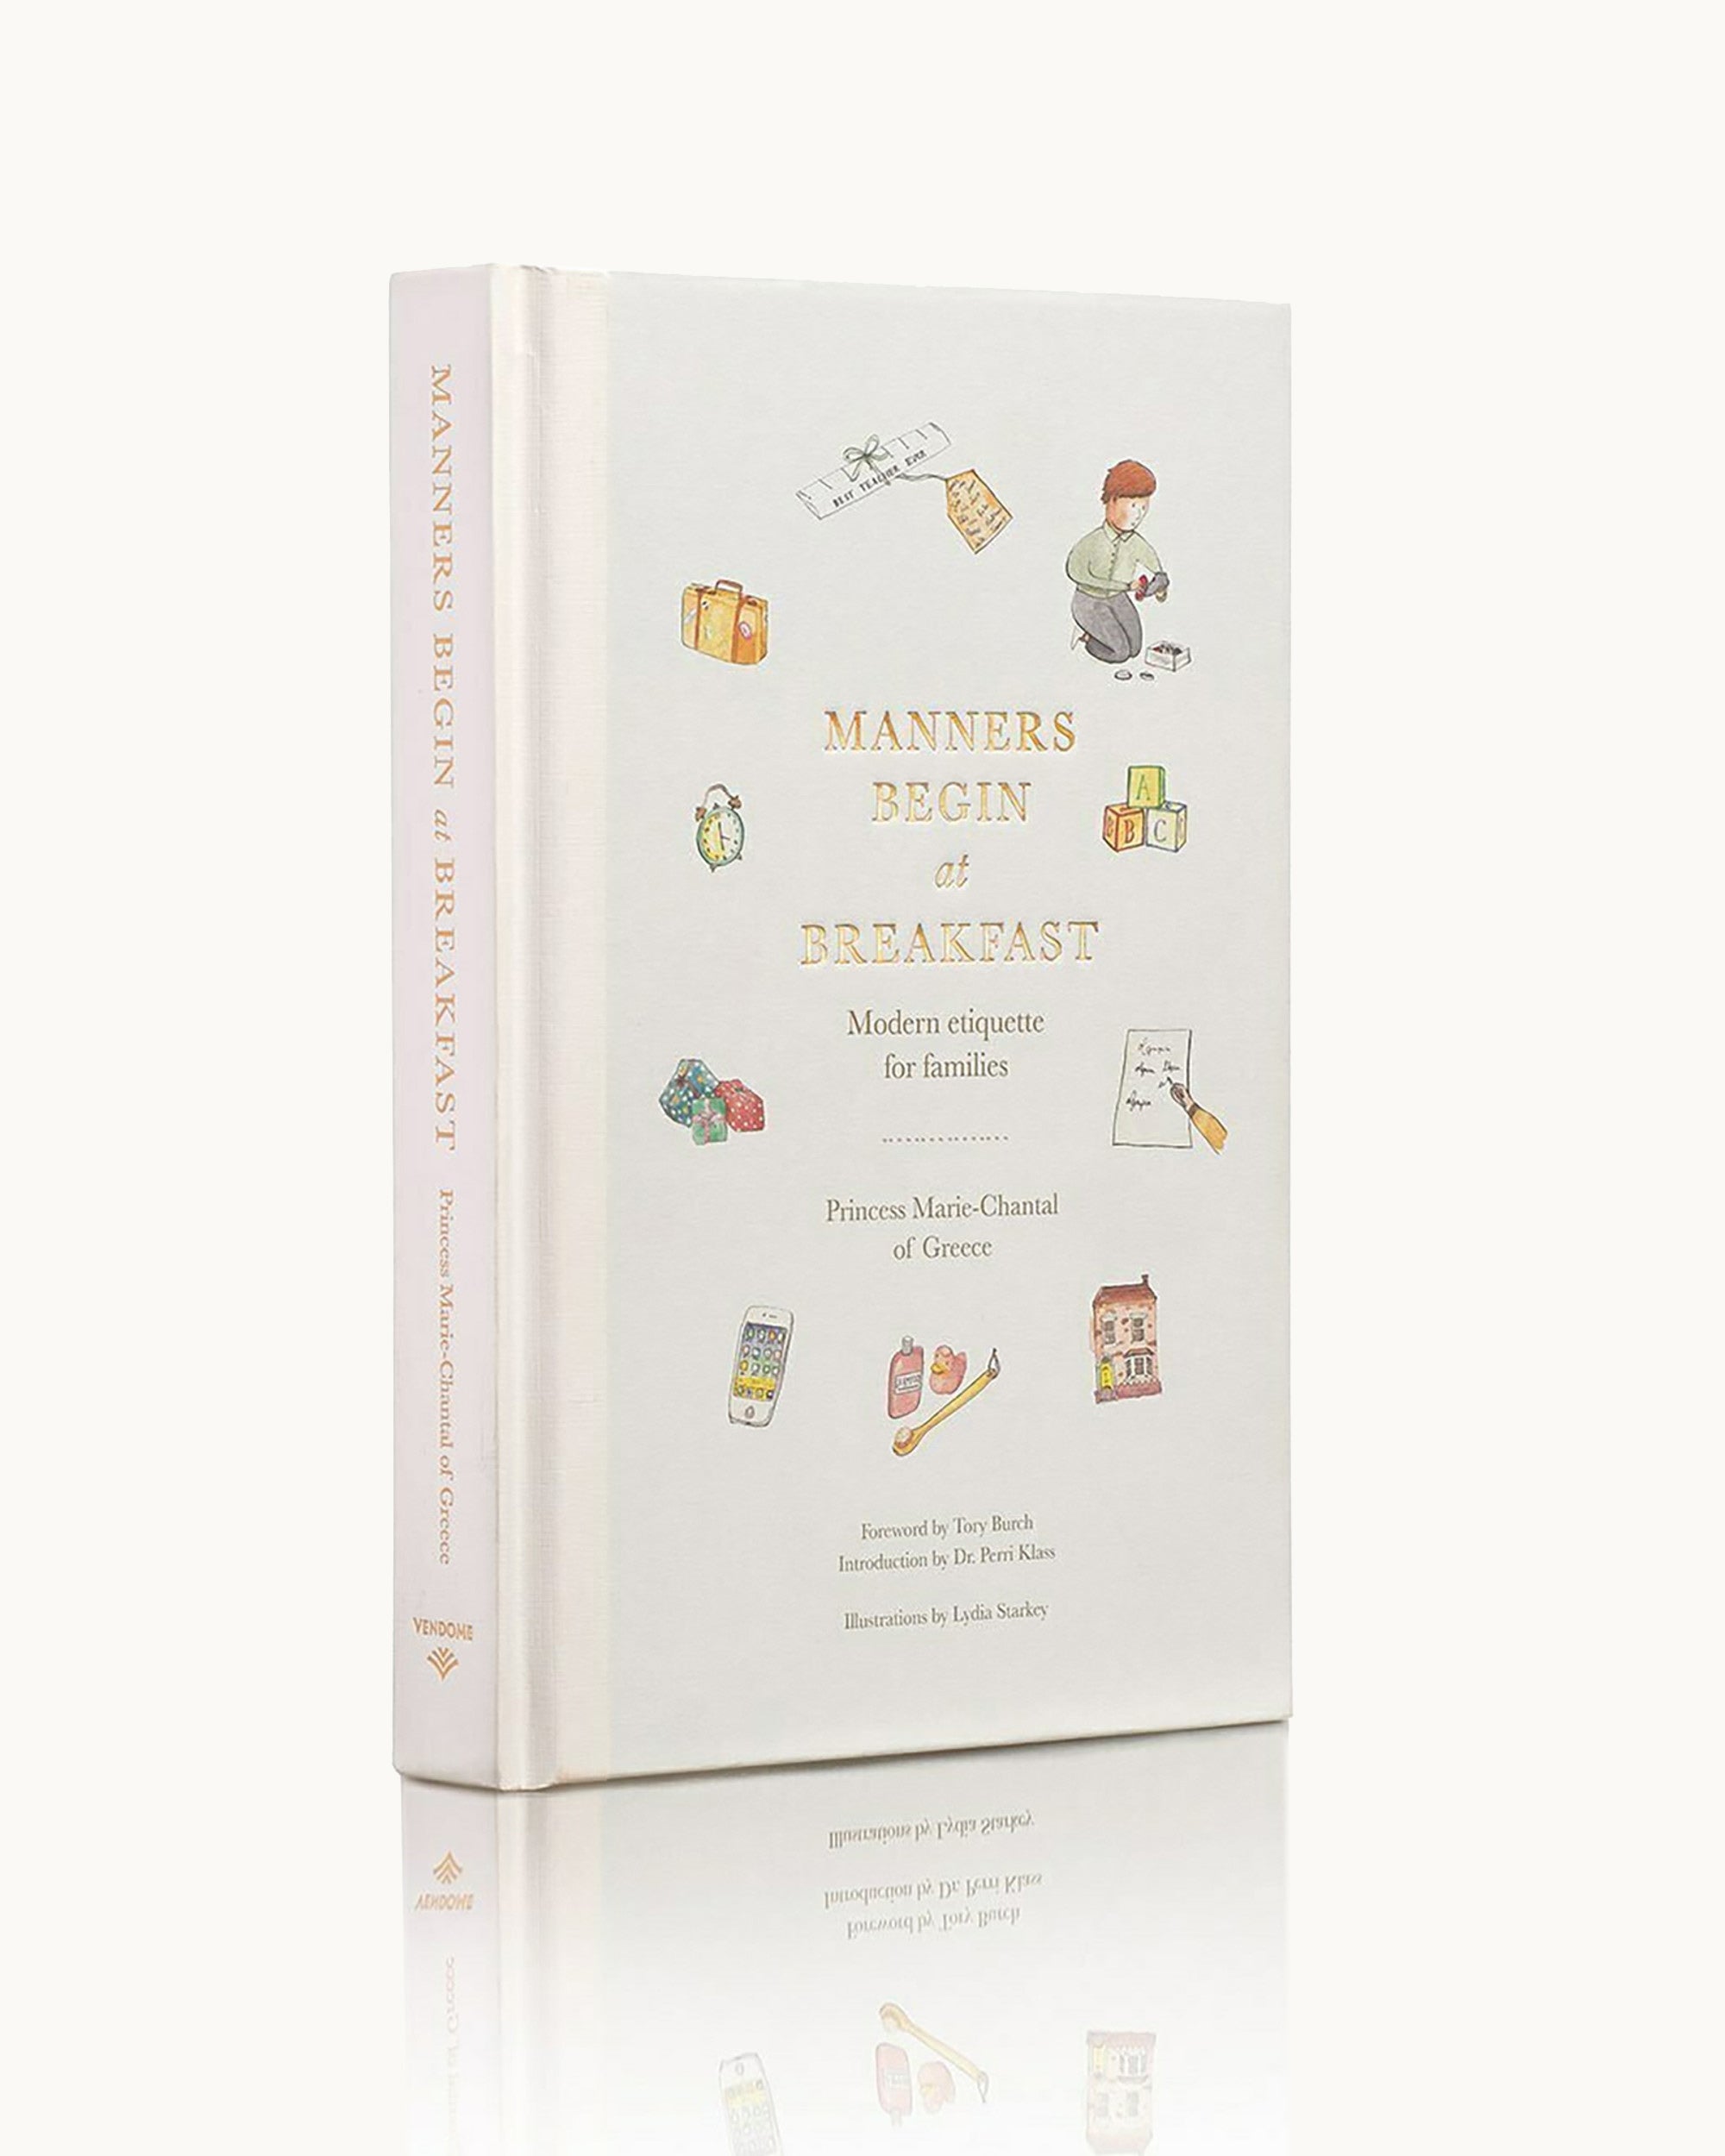 Manners Begin at Breakfast Gift Set